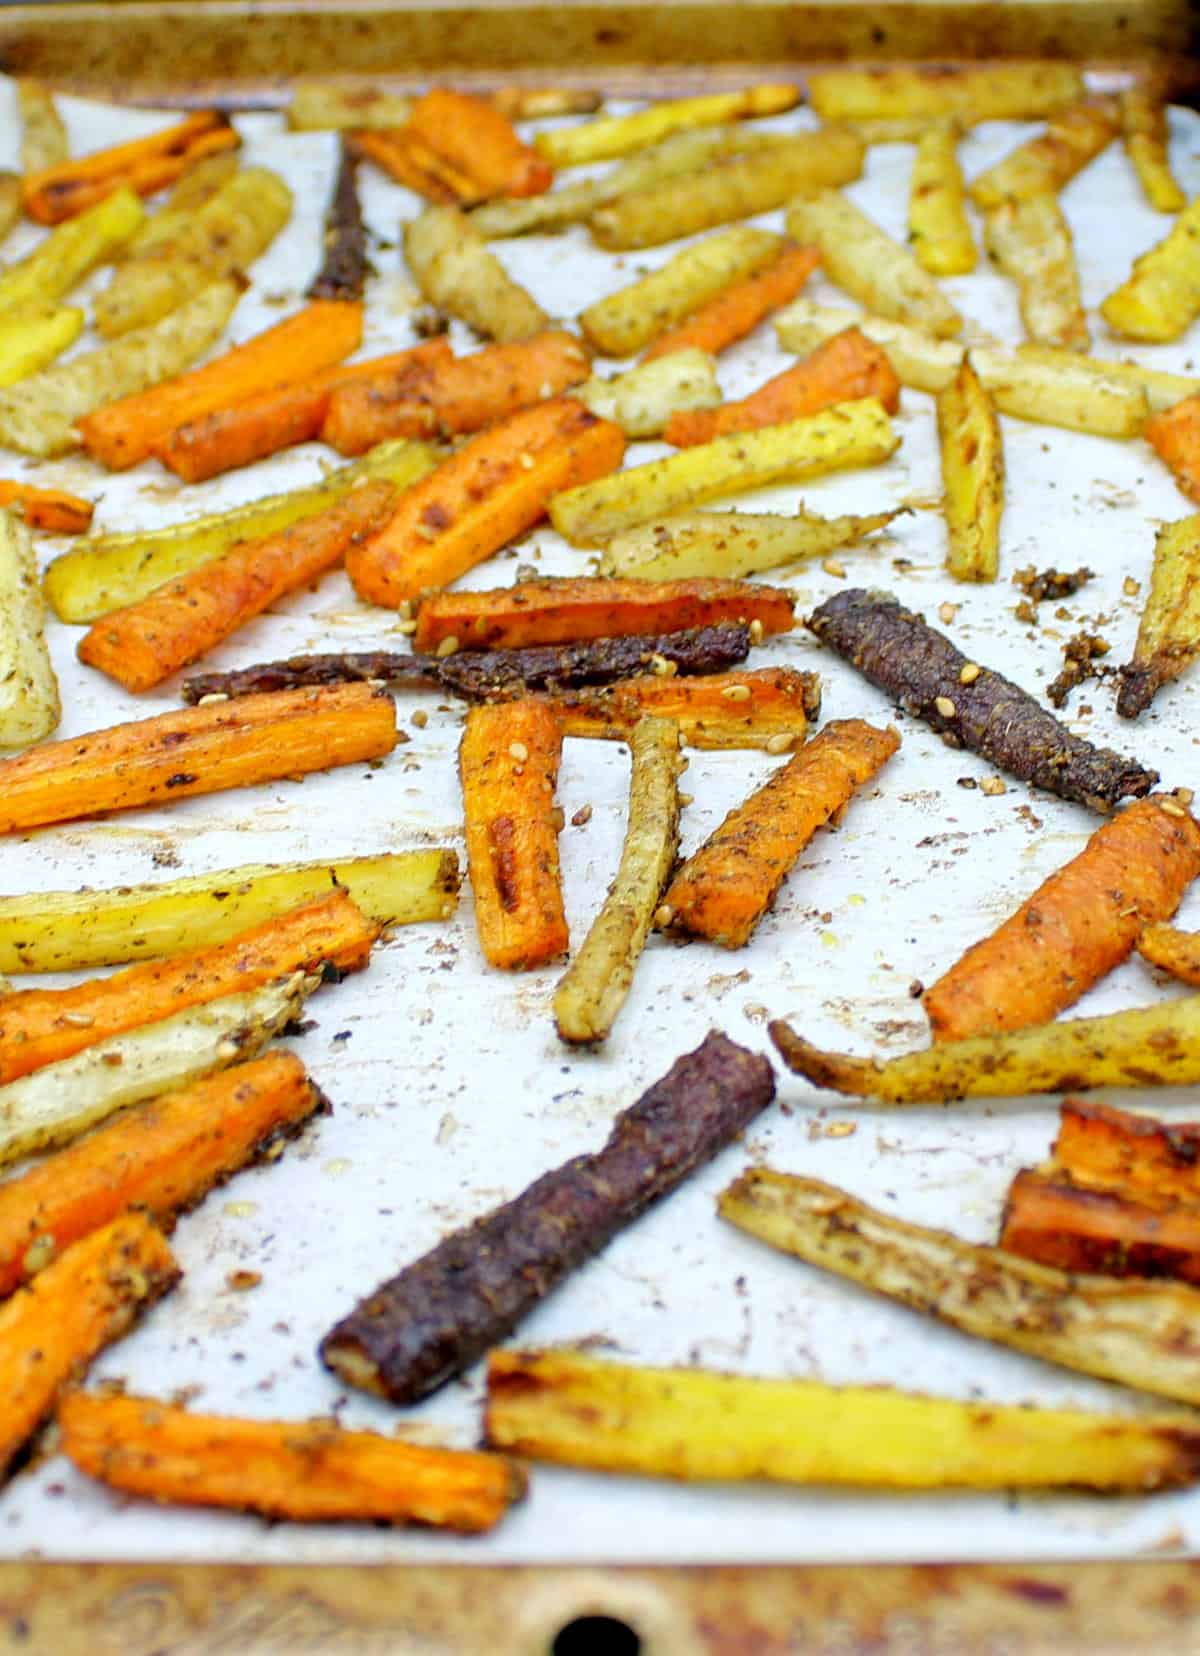 Roasted carrots with zaatar and olive oil on parchment paper in a baking sheet, arranged in a single layer.